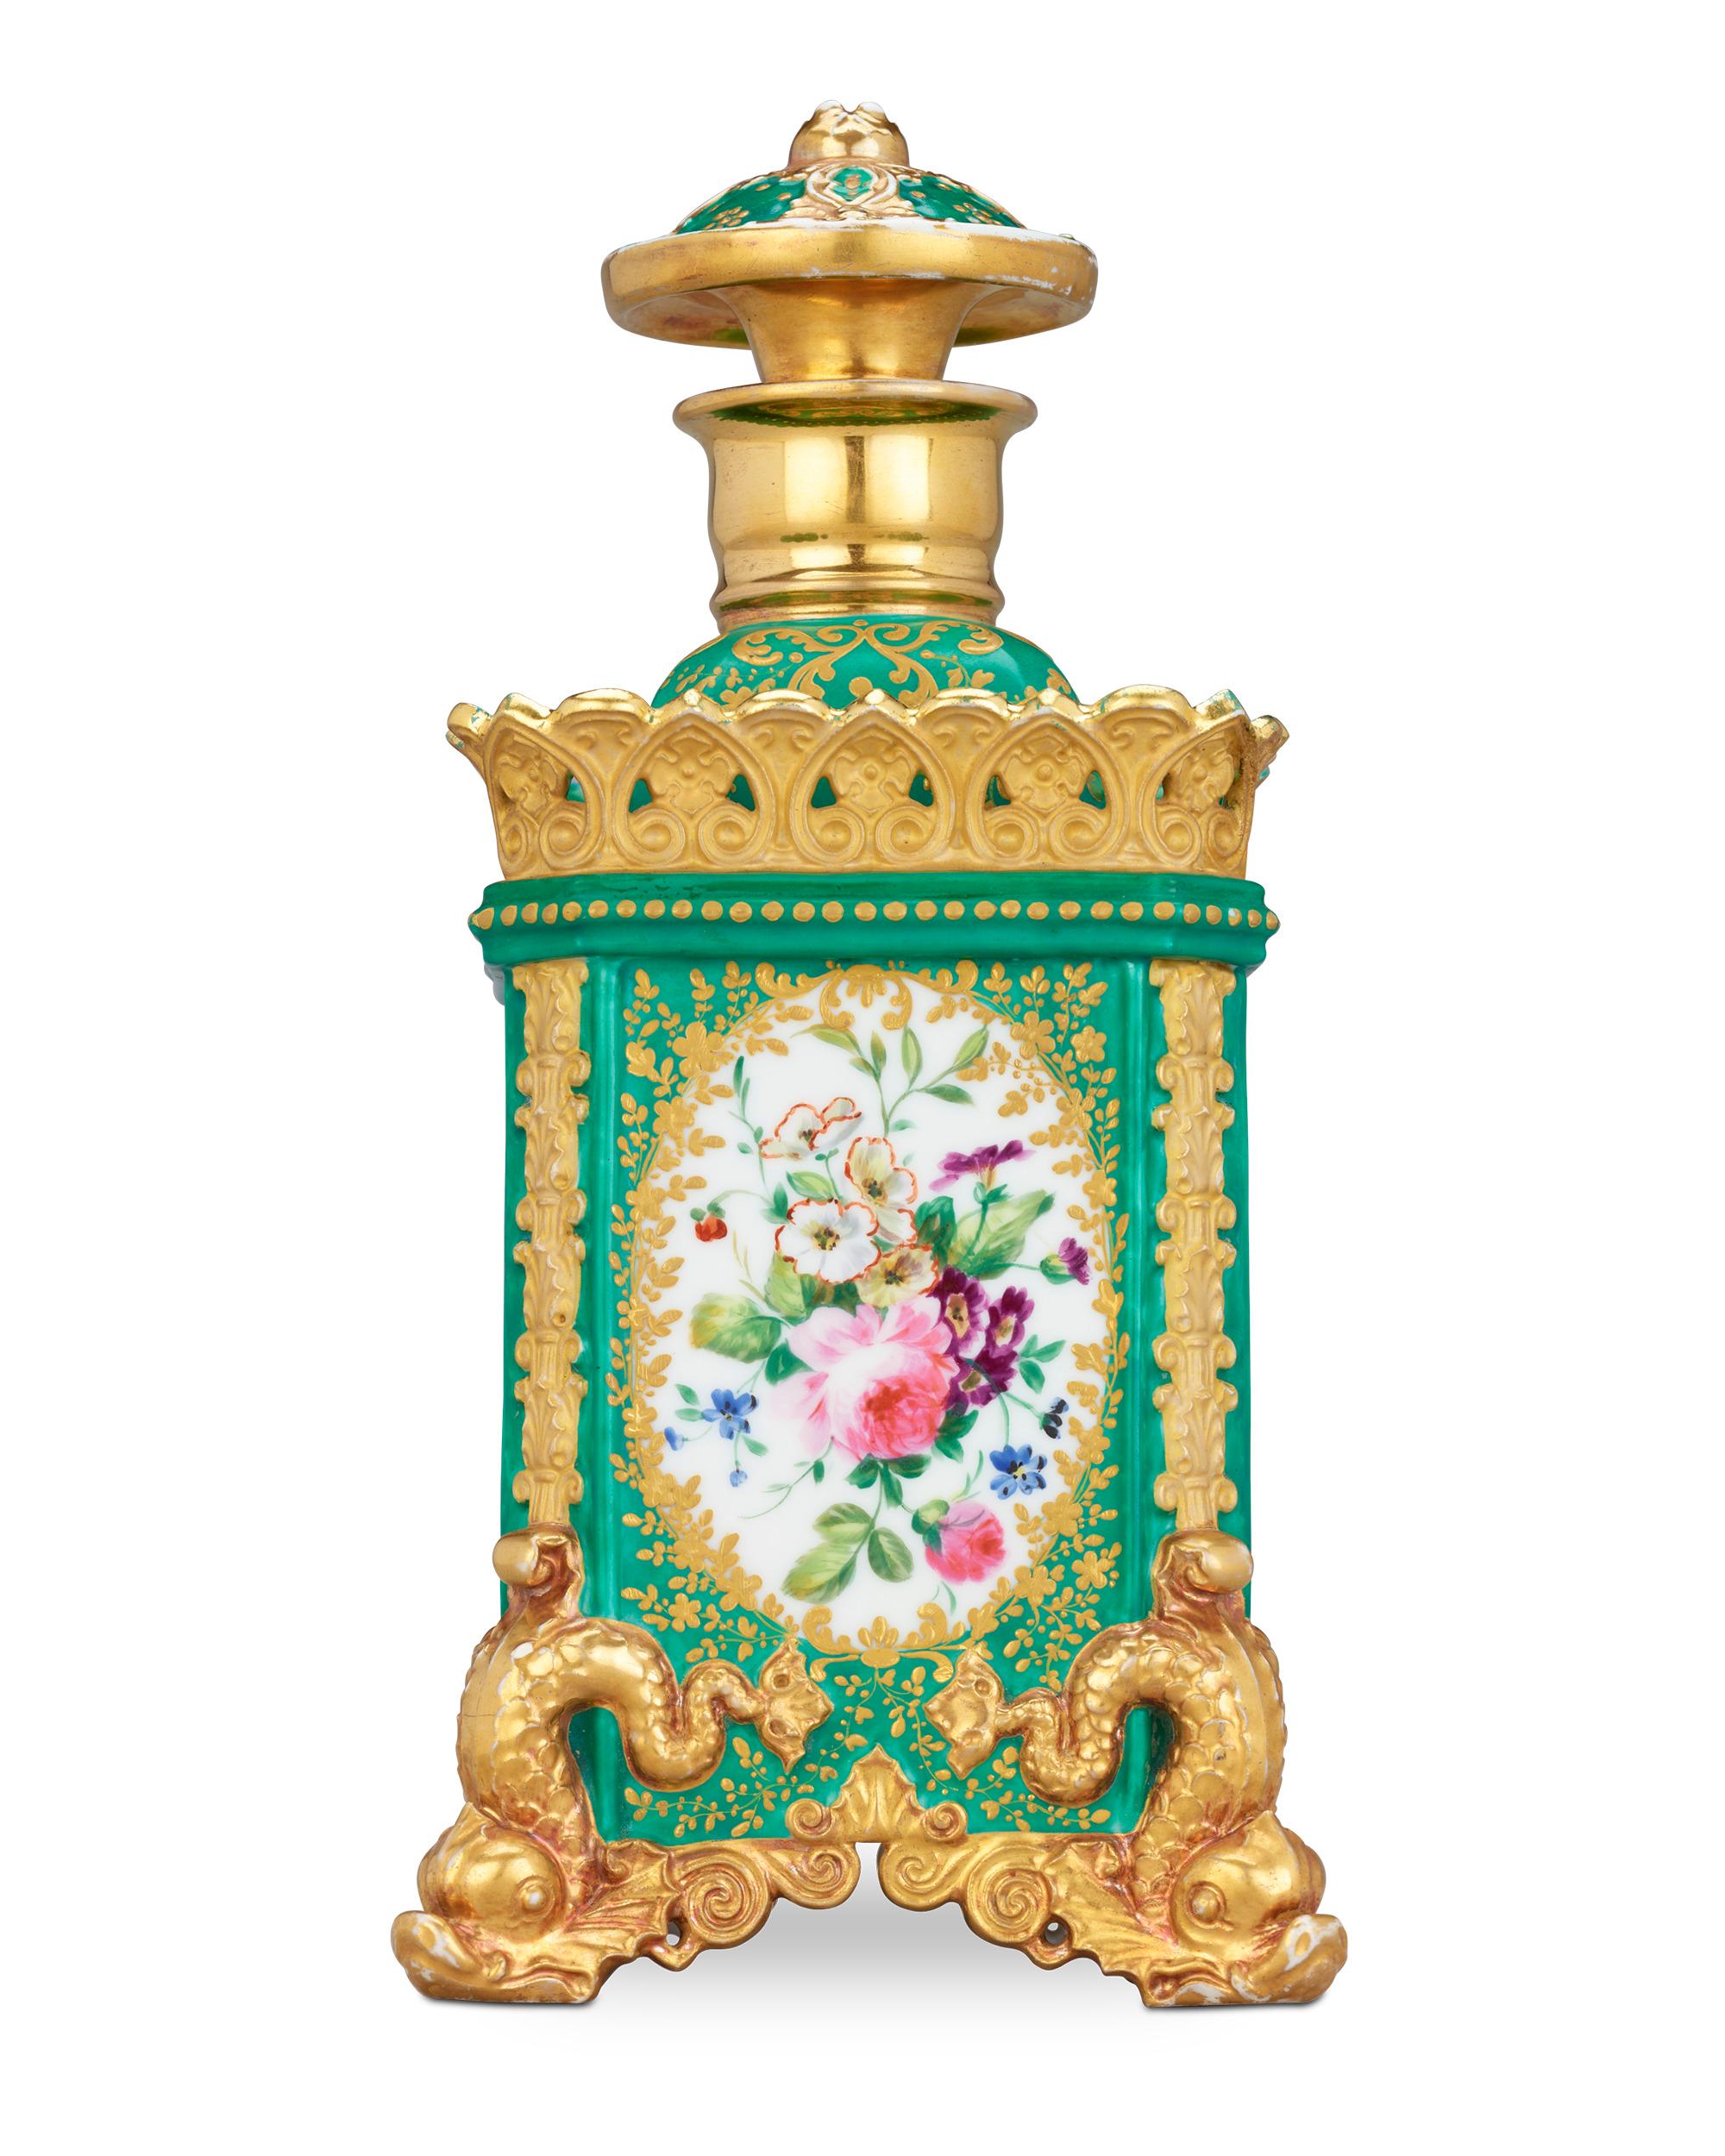 A lush flower motif and rich color distinguish this rare perfume bottle by Jacob Petit, celebrated ceramicist and one of the most significant producers of Rococo ornamental wares during the 19th century. Its unique square form is intricately